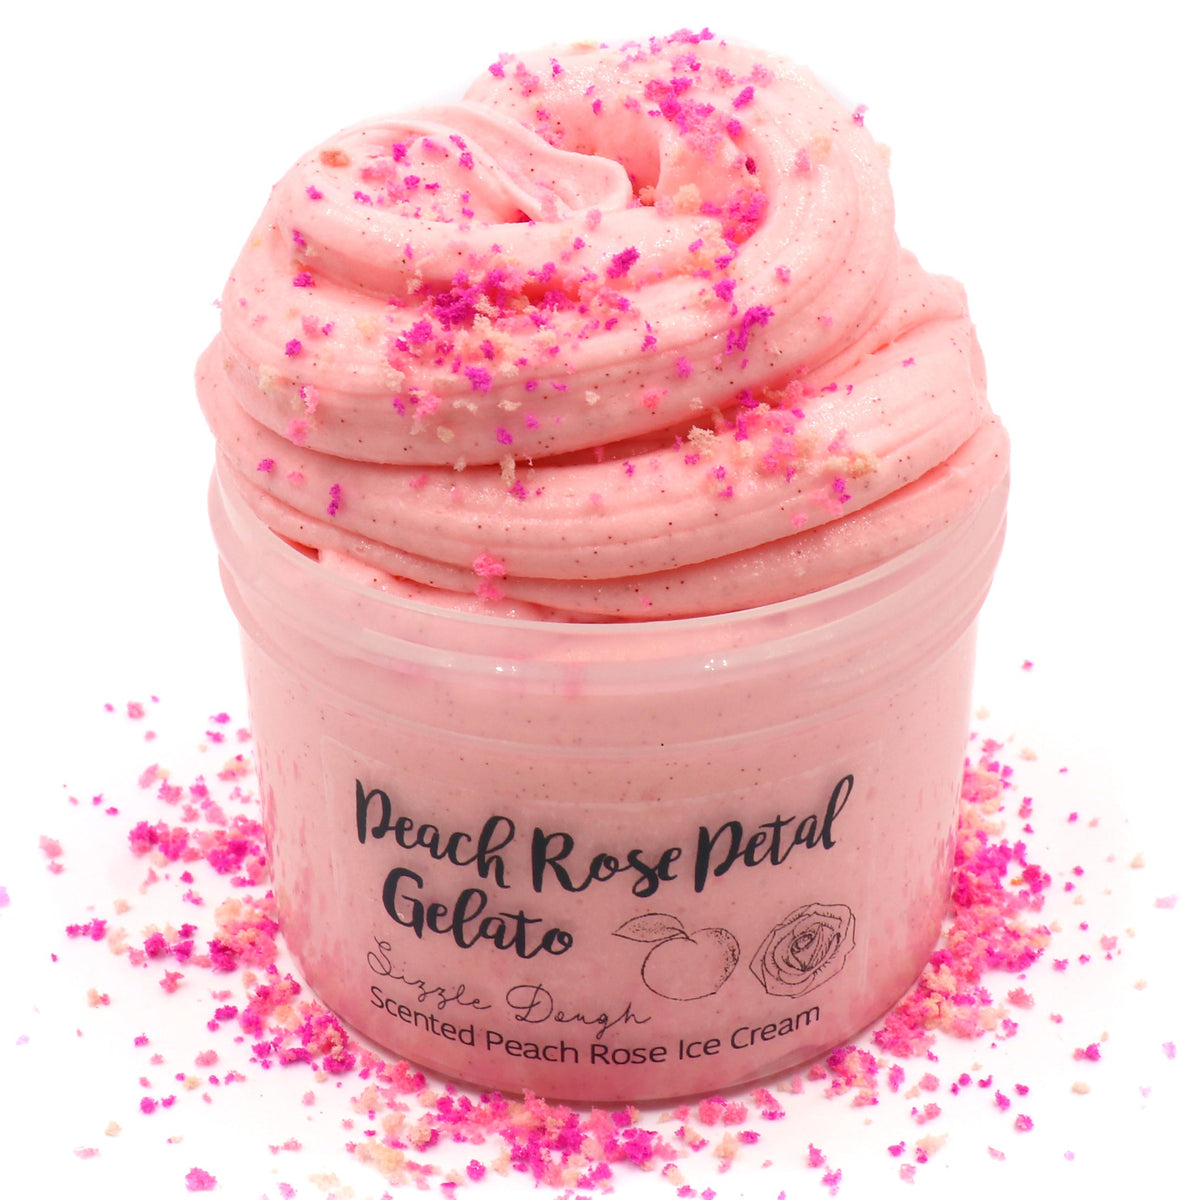 Peach Rose Petal Pink Sprinkles Soft Creamy Sizzly Butter Slime Fantasies Shop 8oz Front View